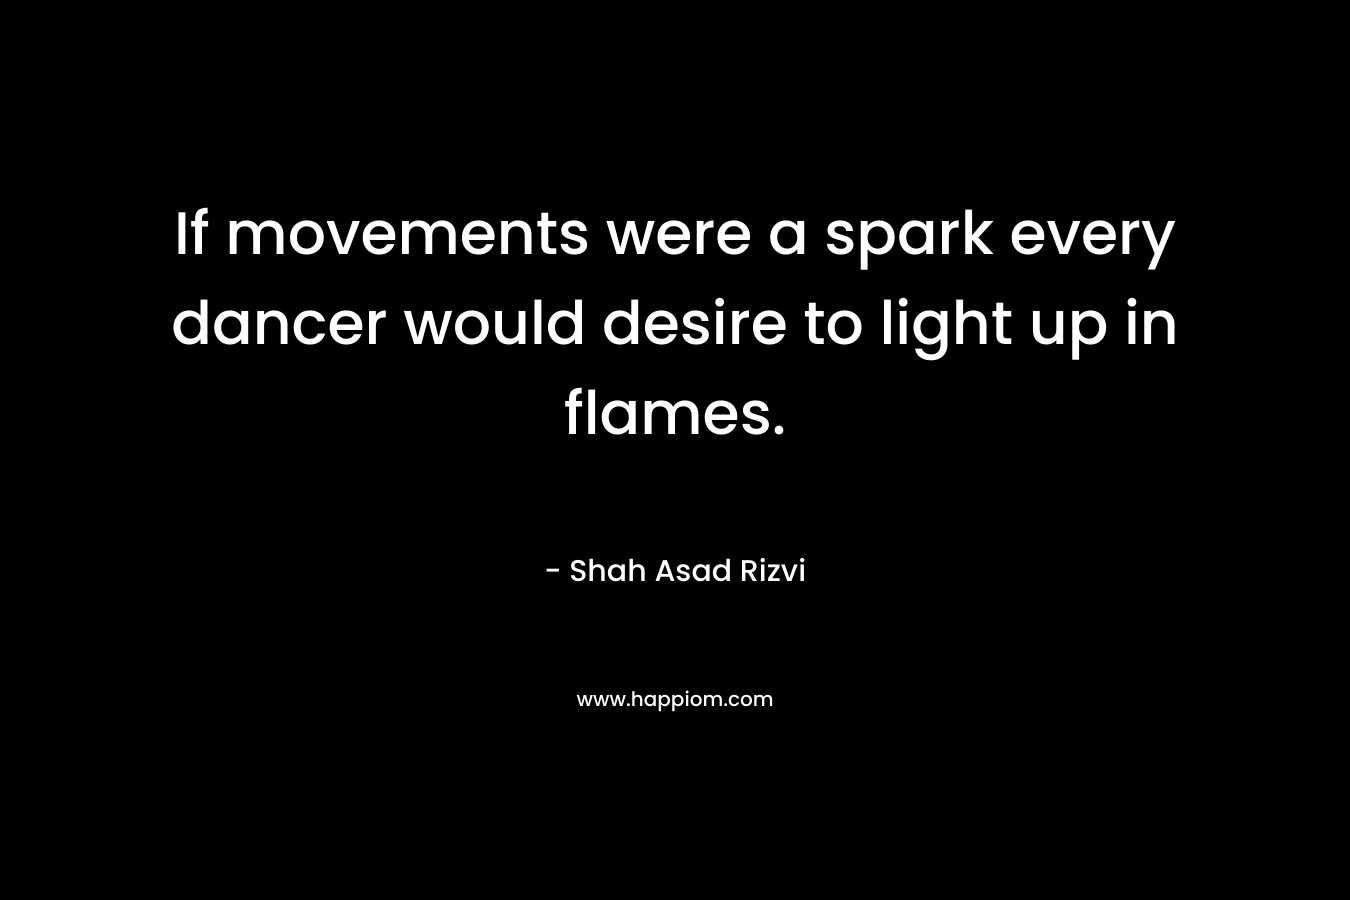 If movements were a spark every dancer would desire to light up in flames.